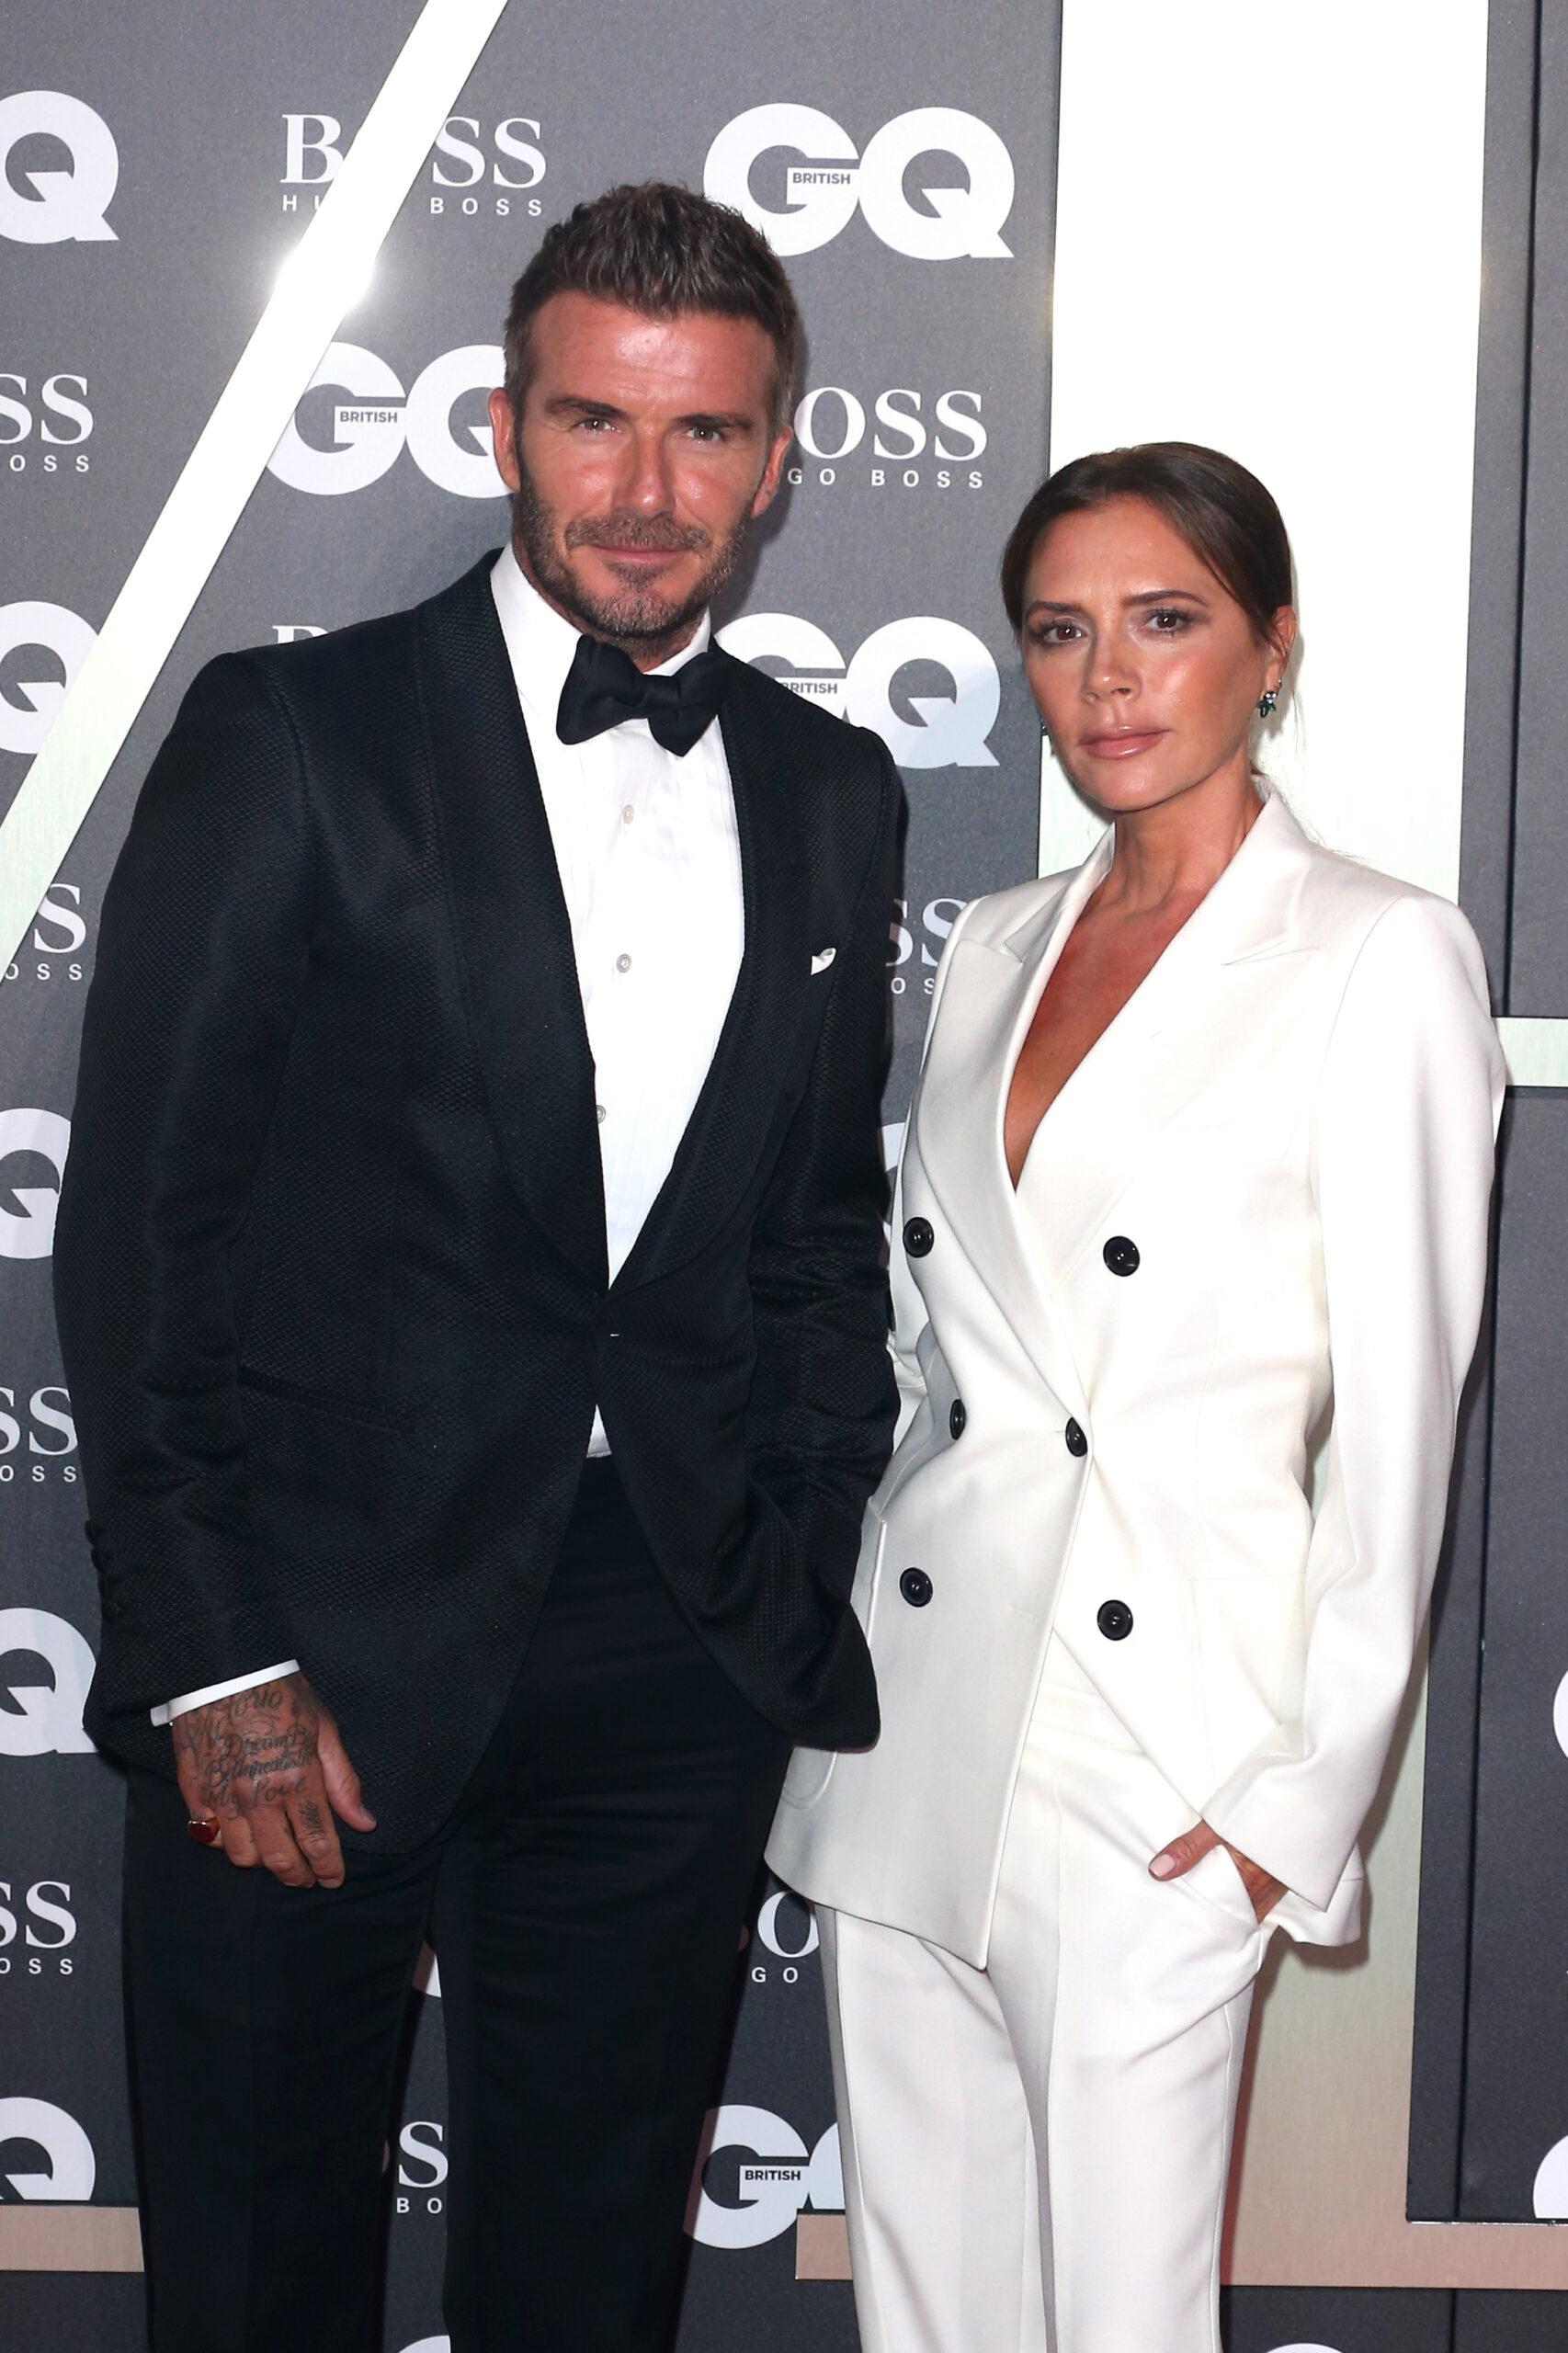 David & Victoria Beckham Have Been Married HOW Many Years??